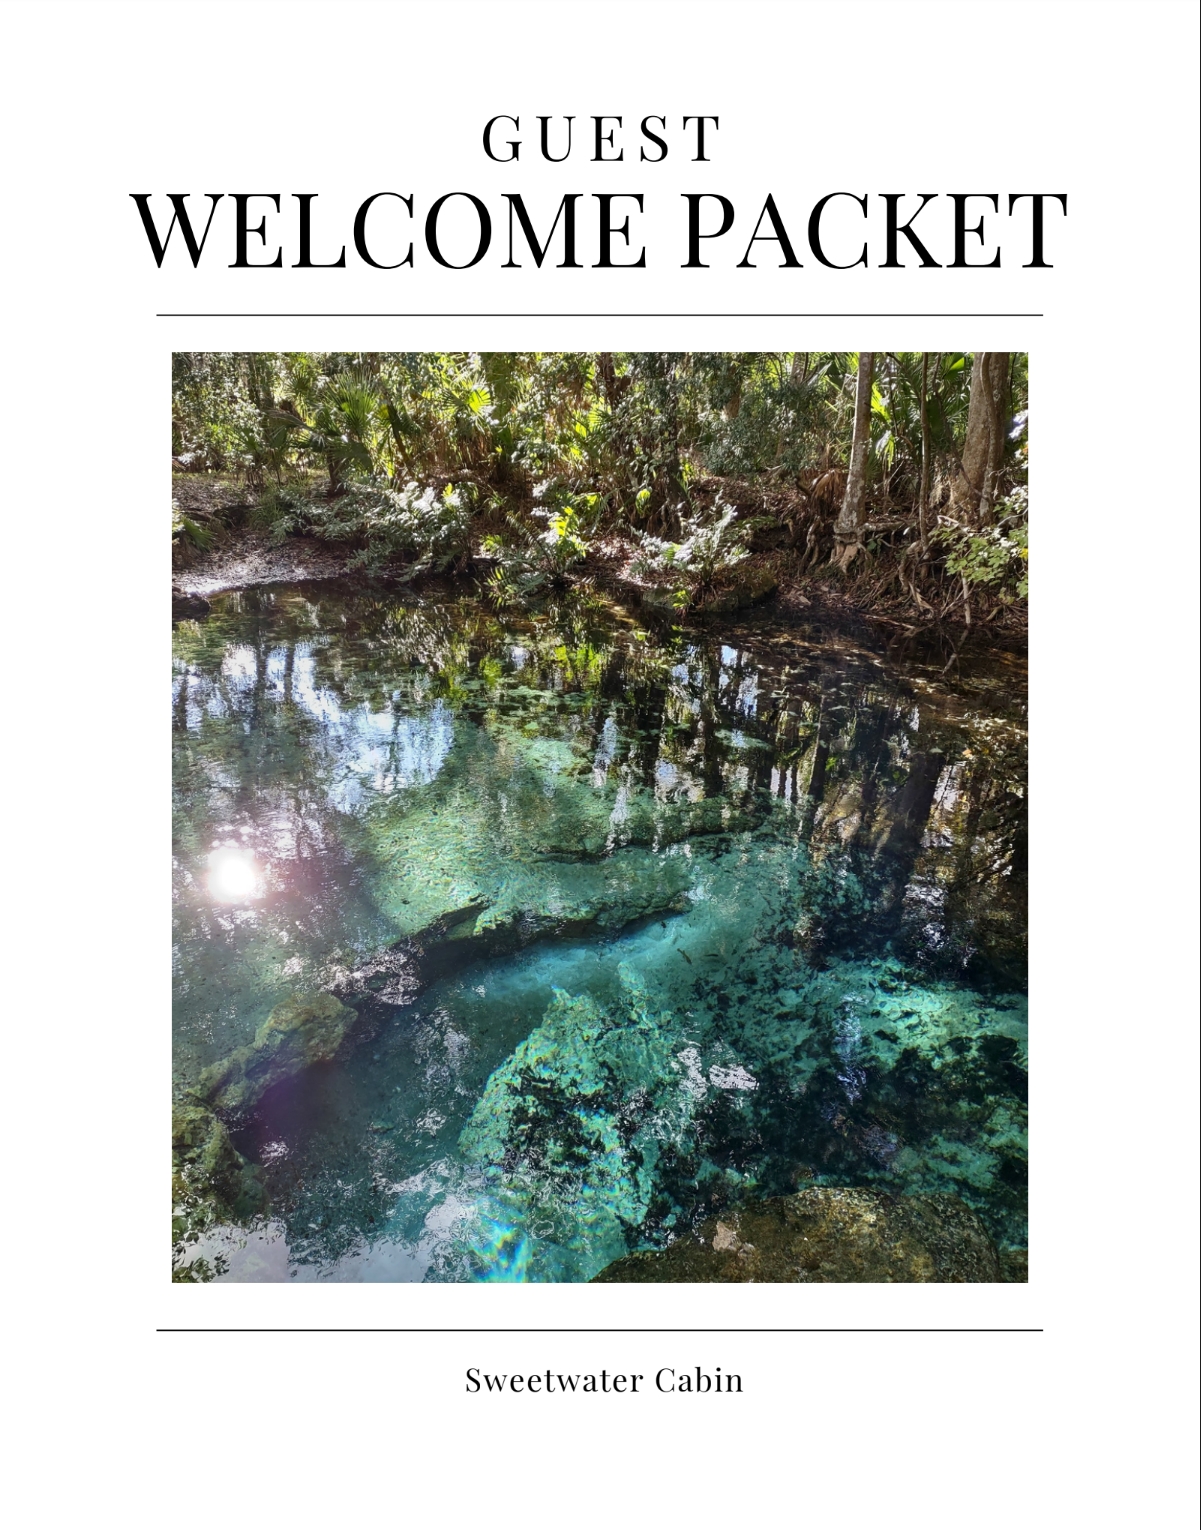 the Welcome Packet for Sweetwater Cabin at Ocala National Forest